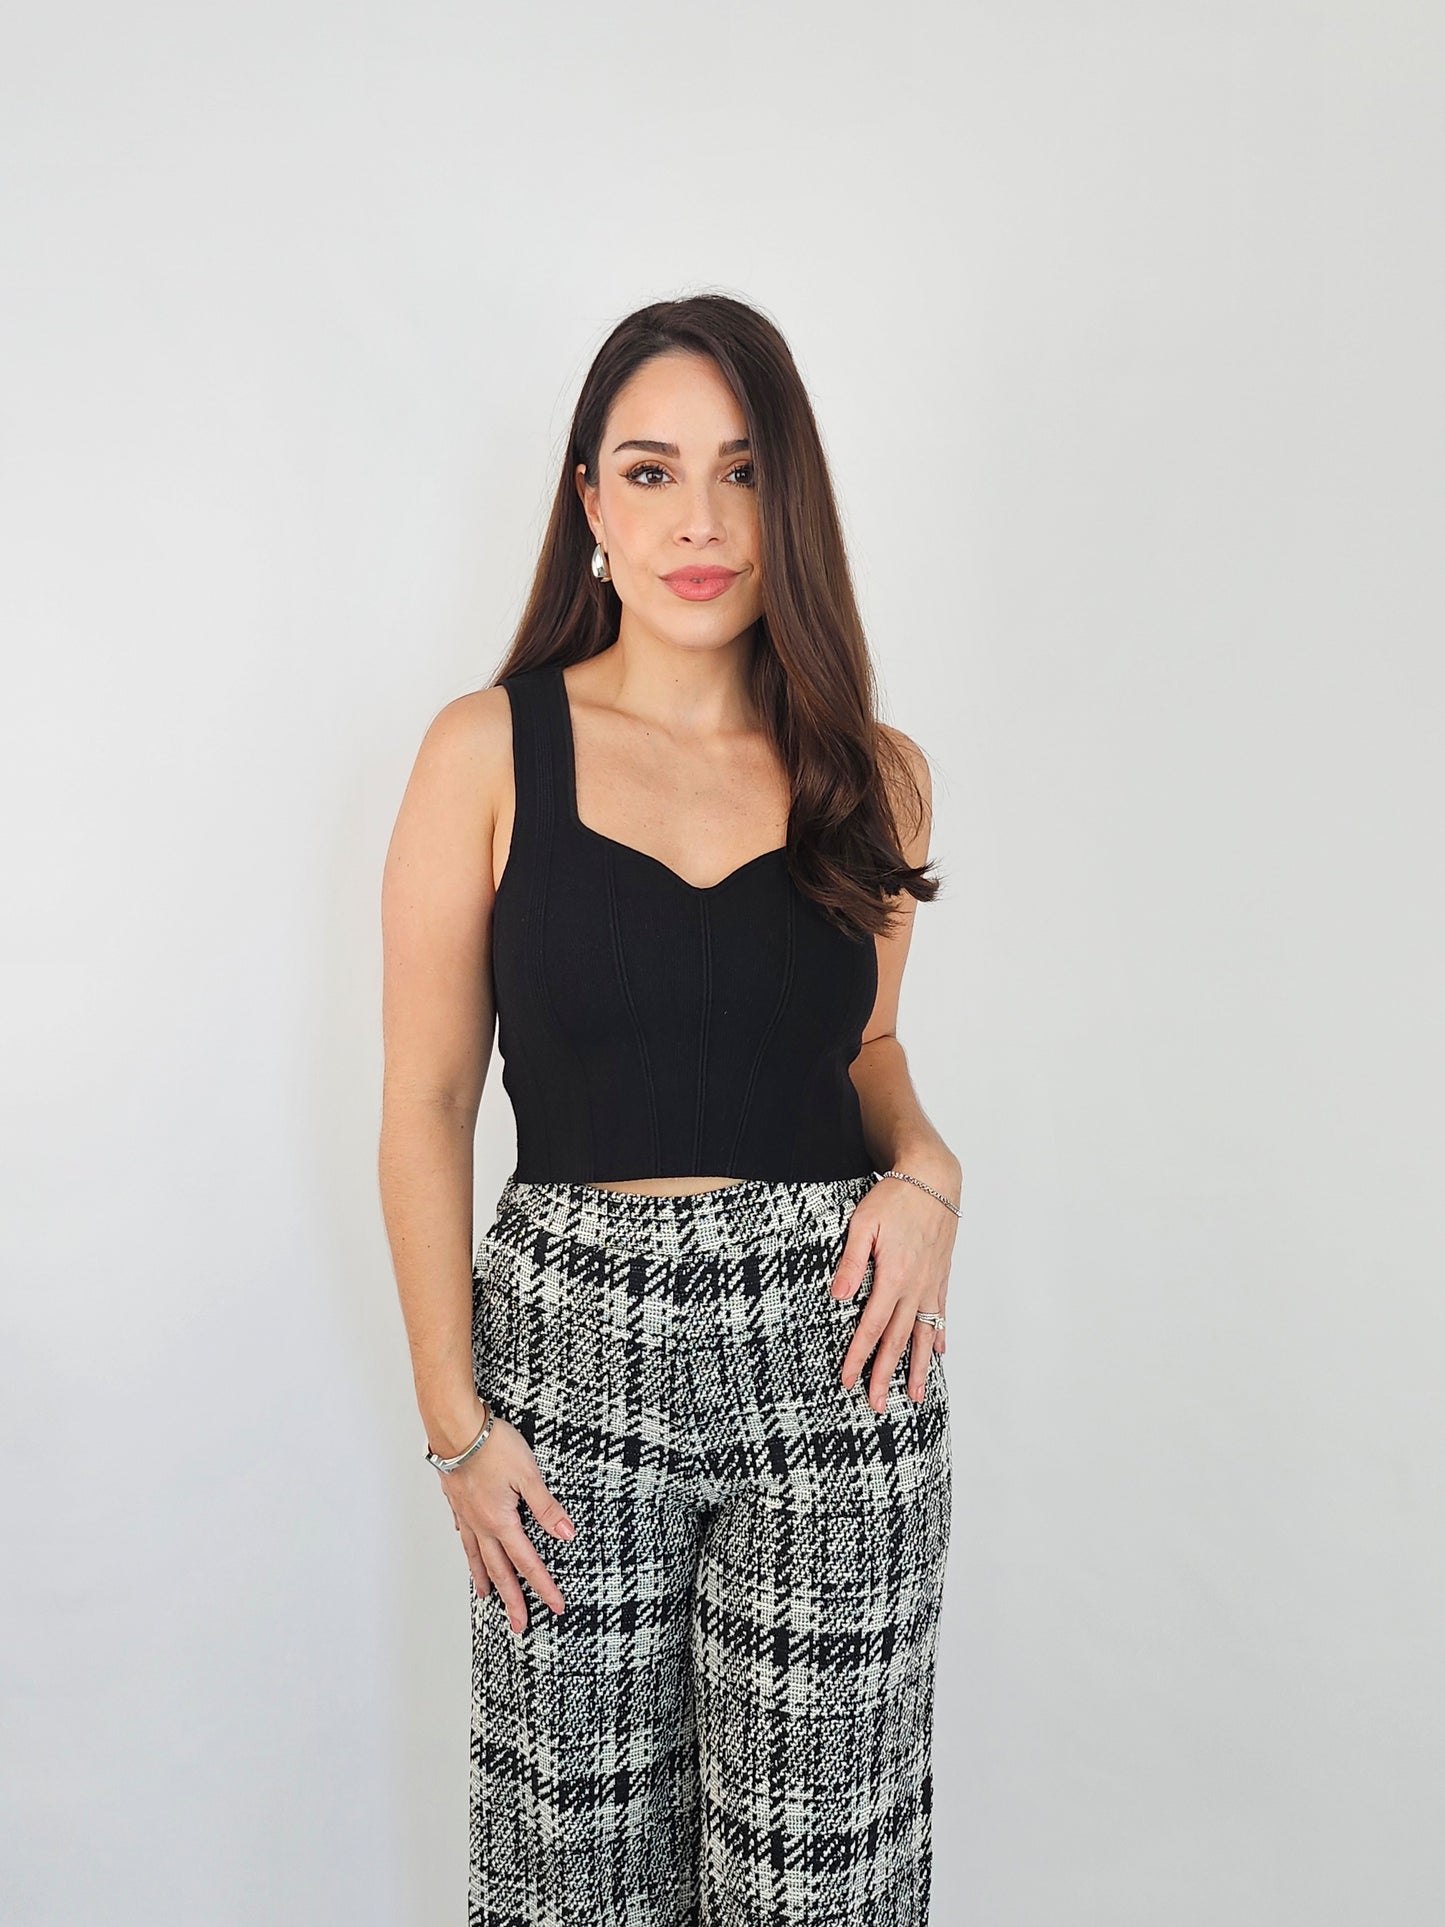 Black knit crop top perfect to pair with trousers, an a-line skirt or shorts. You can make this top versatile by pairing it for work or for an everyday look